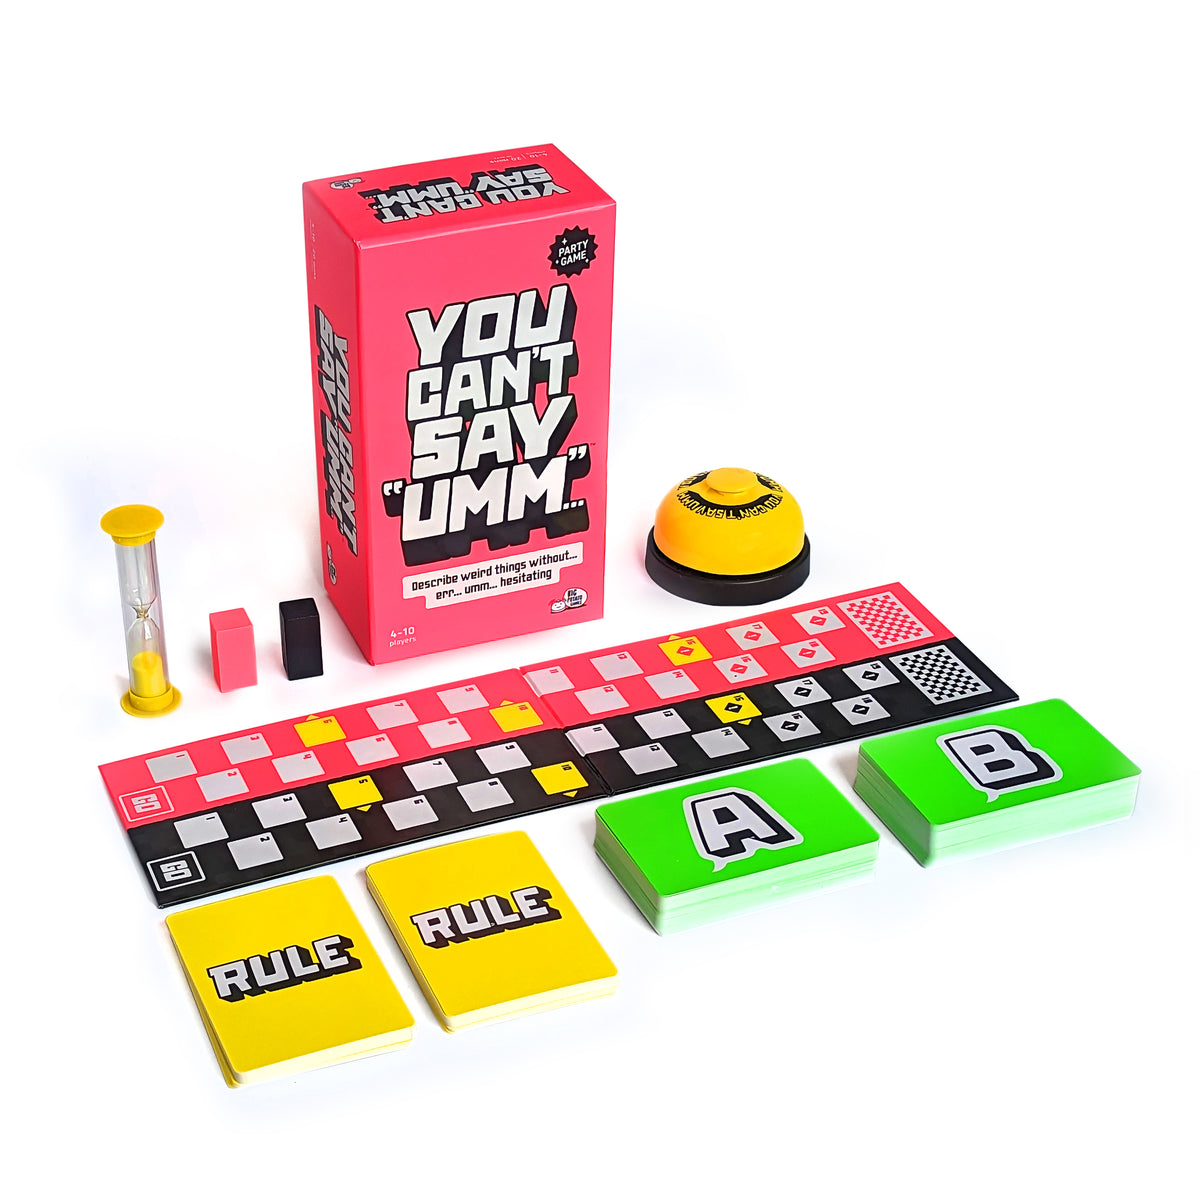 You Can&#39;t Say Umm Party Game by Big Potato Games at Penny black - contents